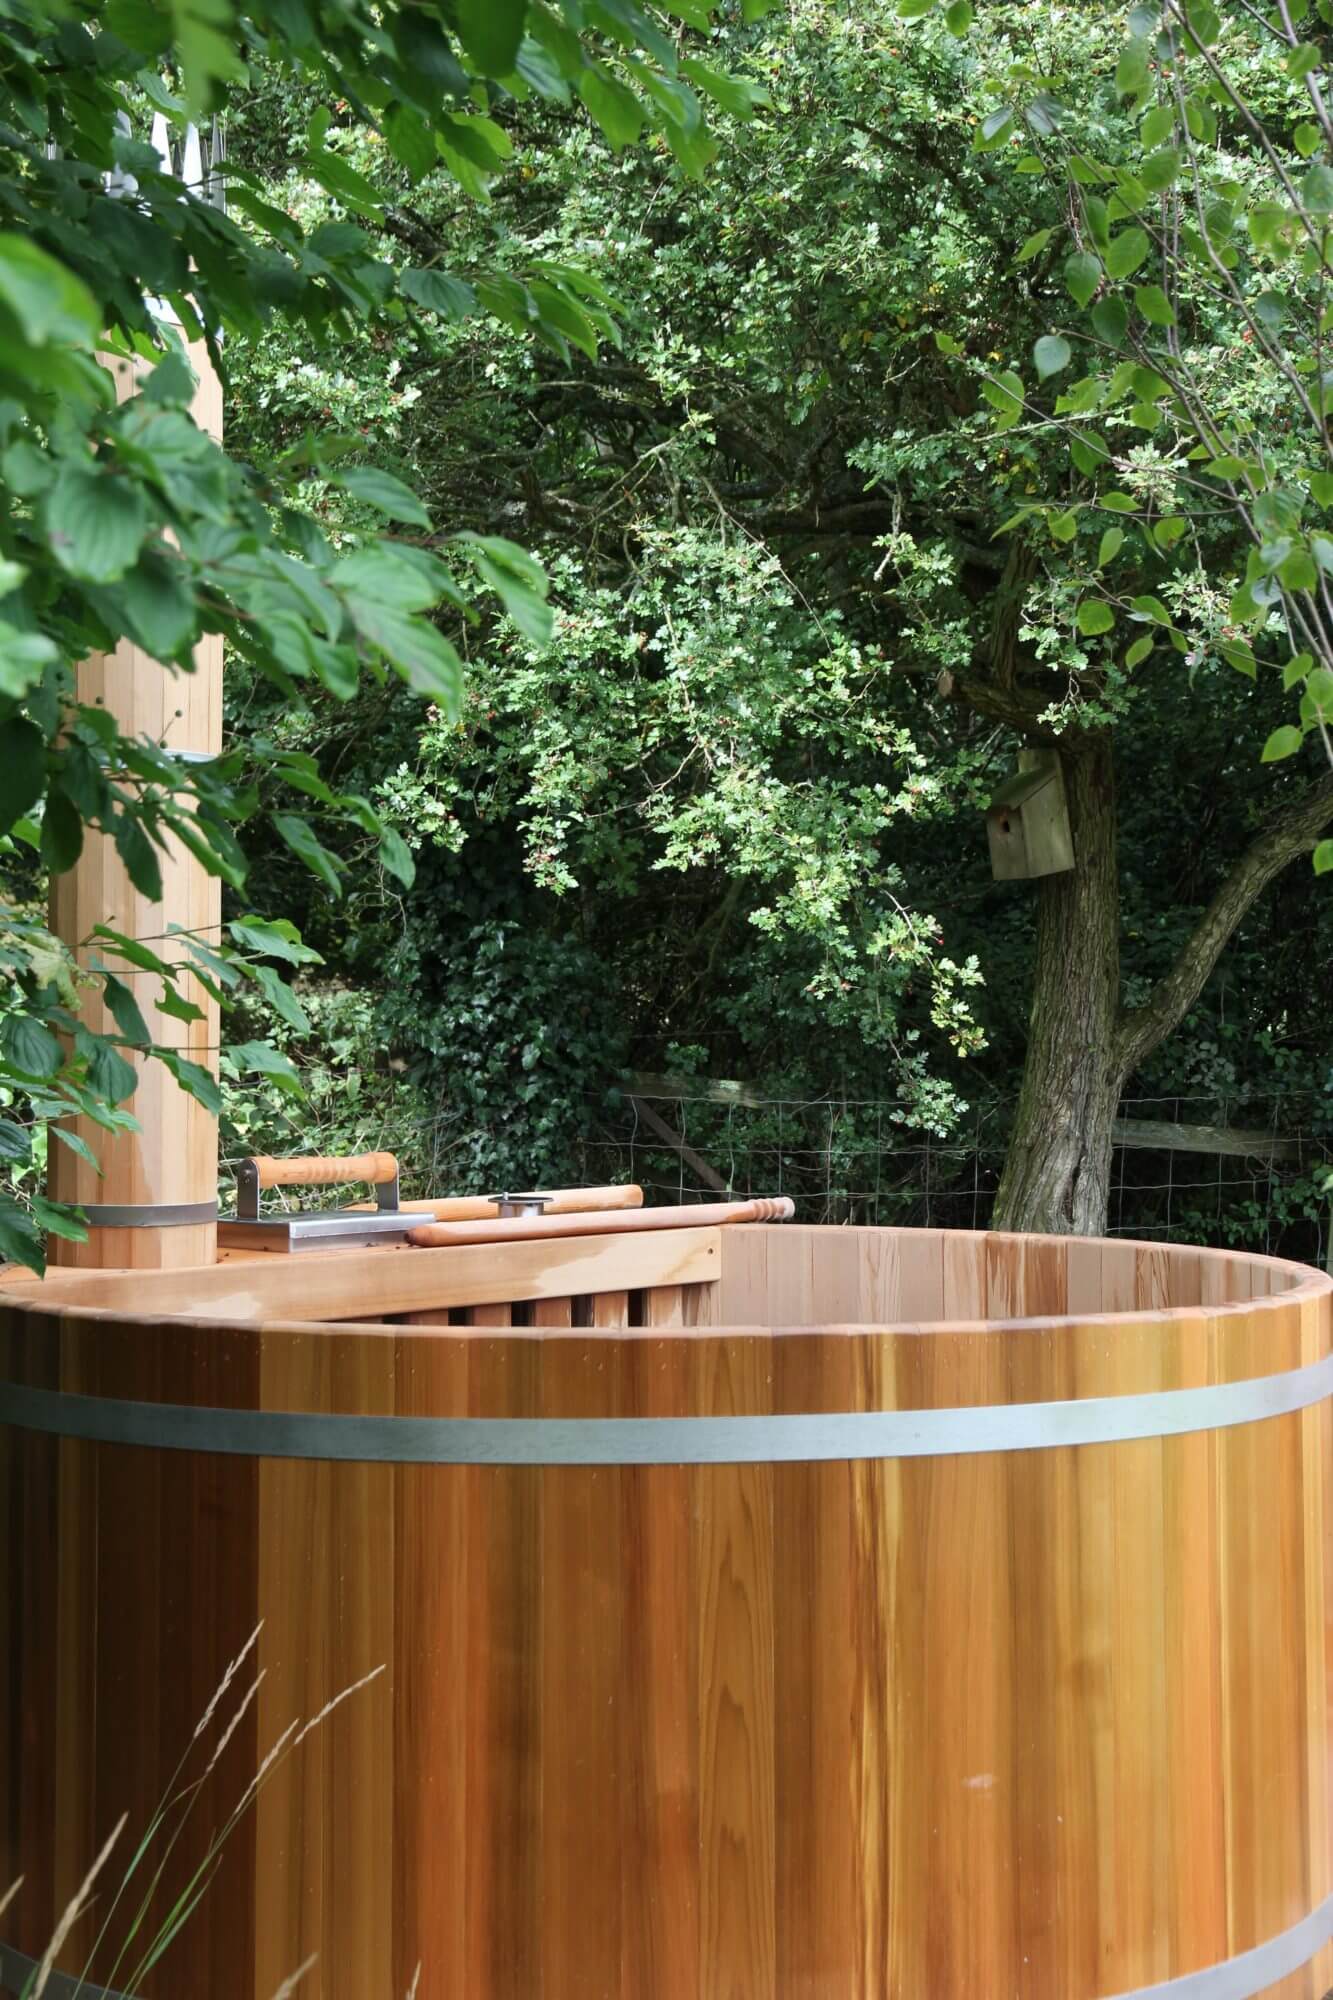 Woodfired hot tub in newly designed garden